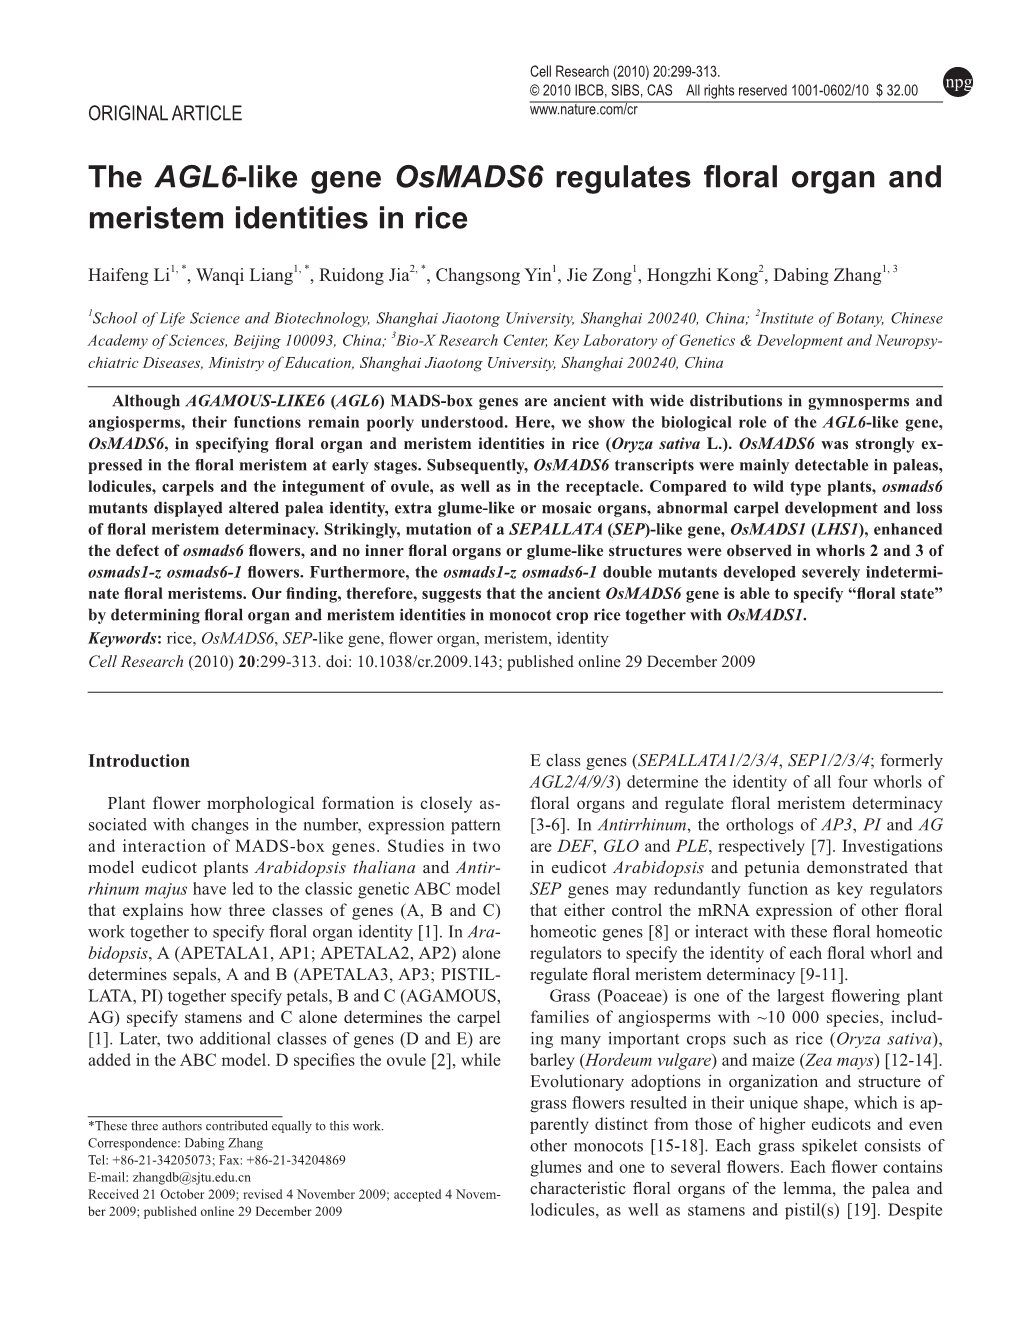 The AGL6-Like Gene Osmads6 Regulates Floral Organ and Meristem Identities in Rice